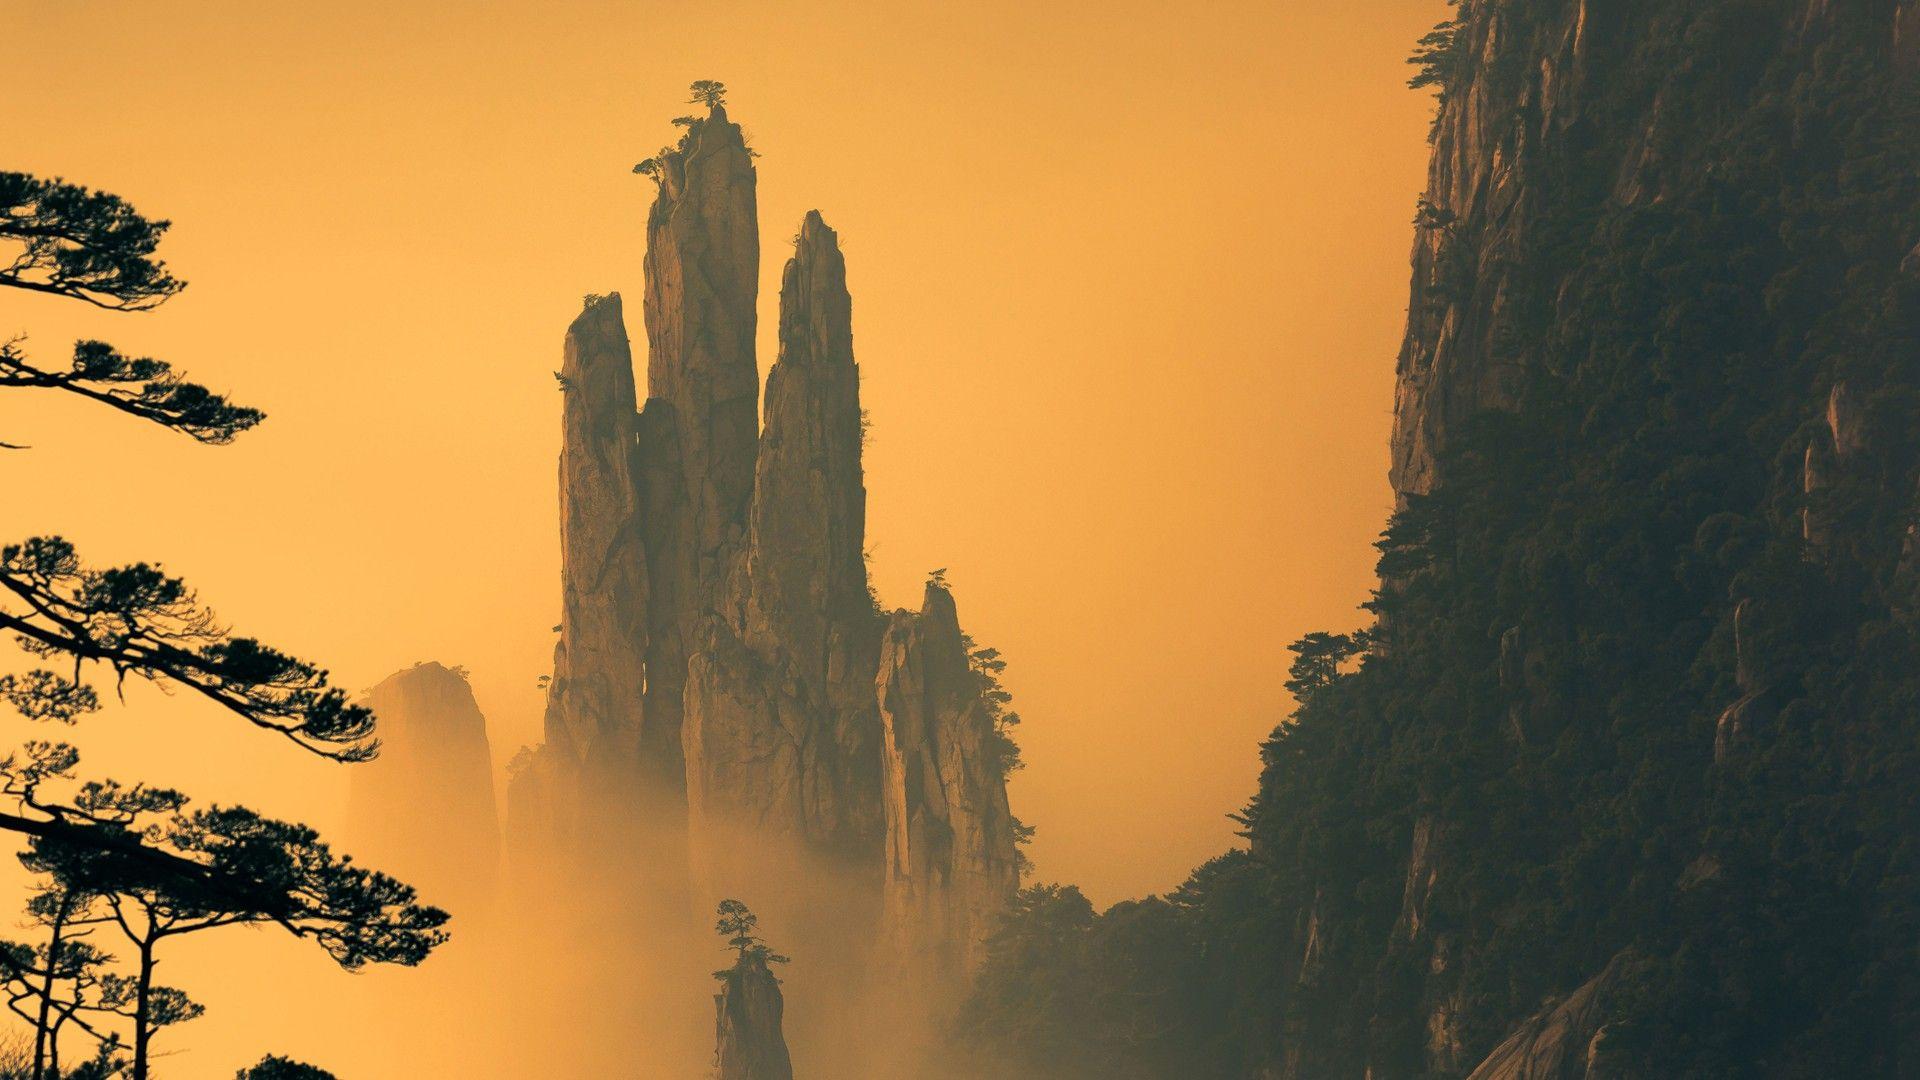 Huangshan: Embracing the Otherworldly Beauty of China's Yellow Mountains